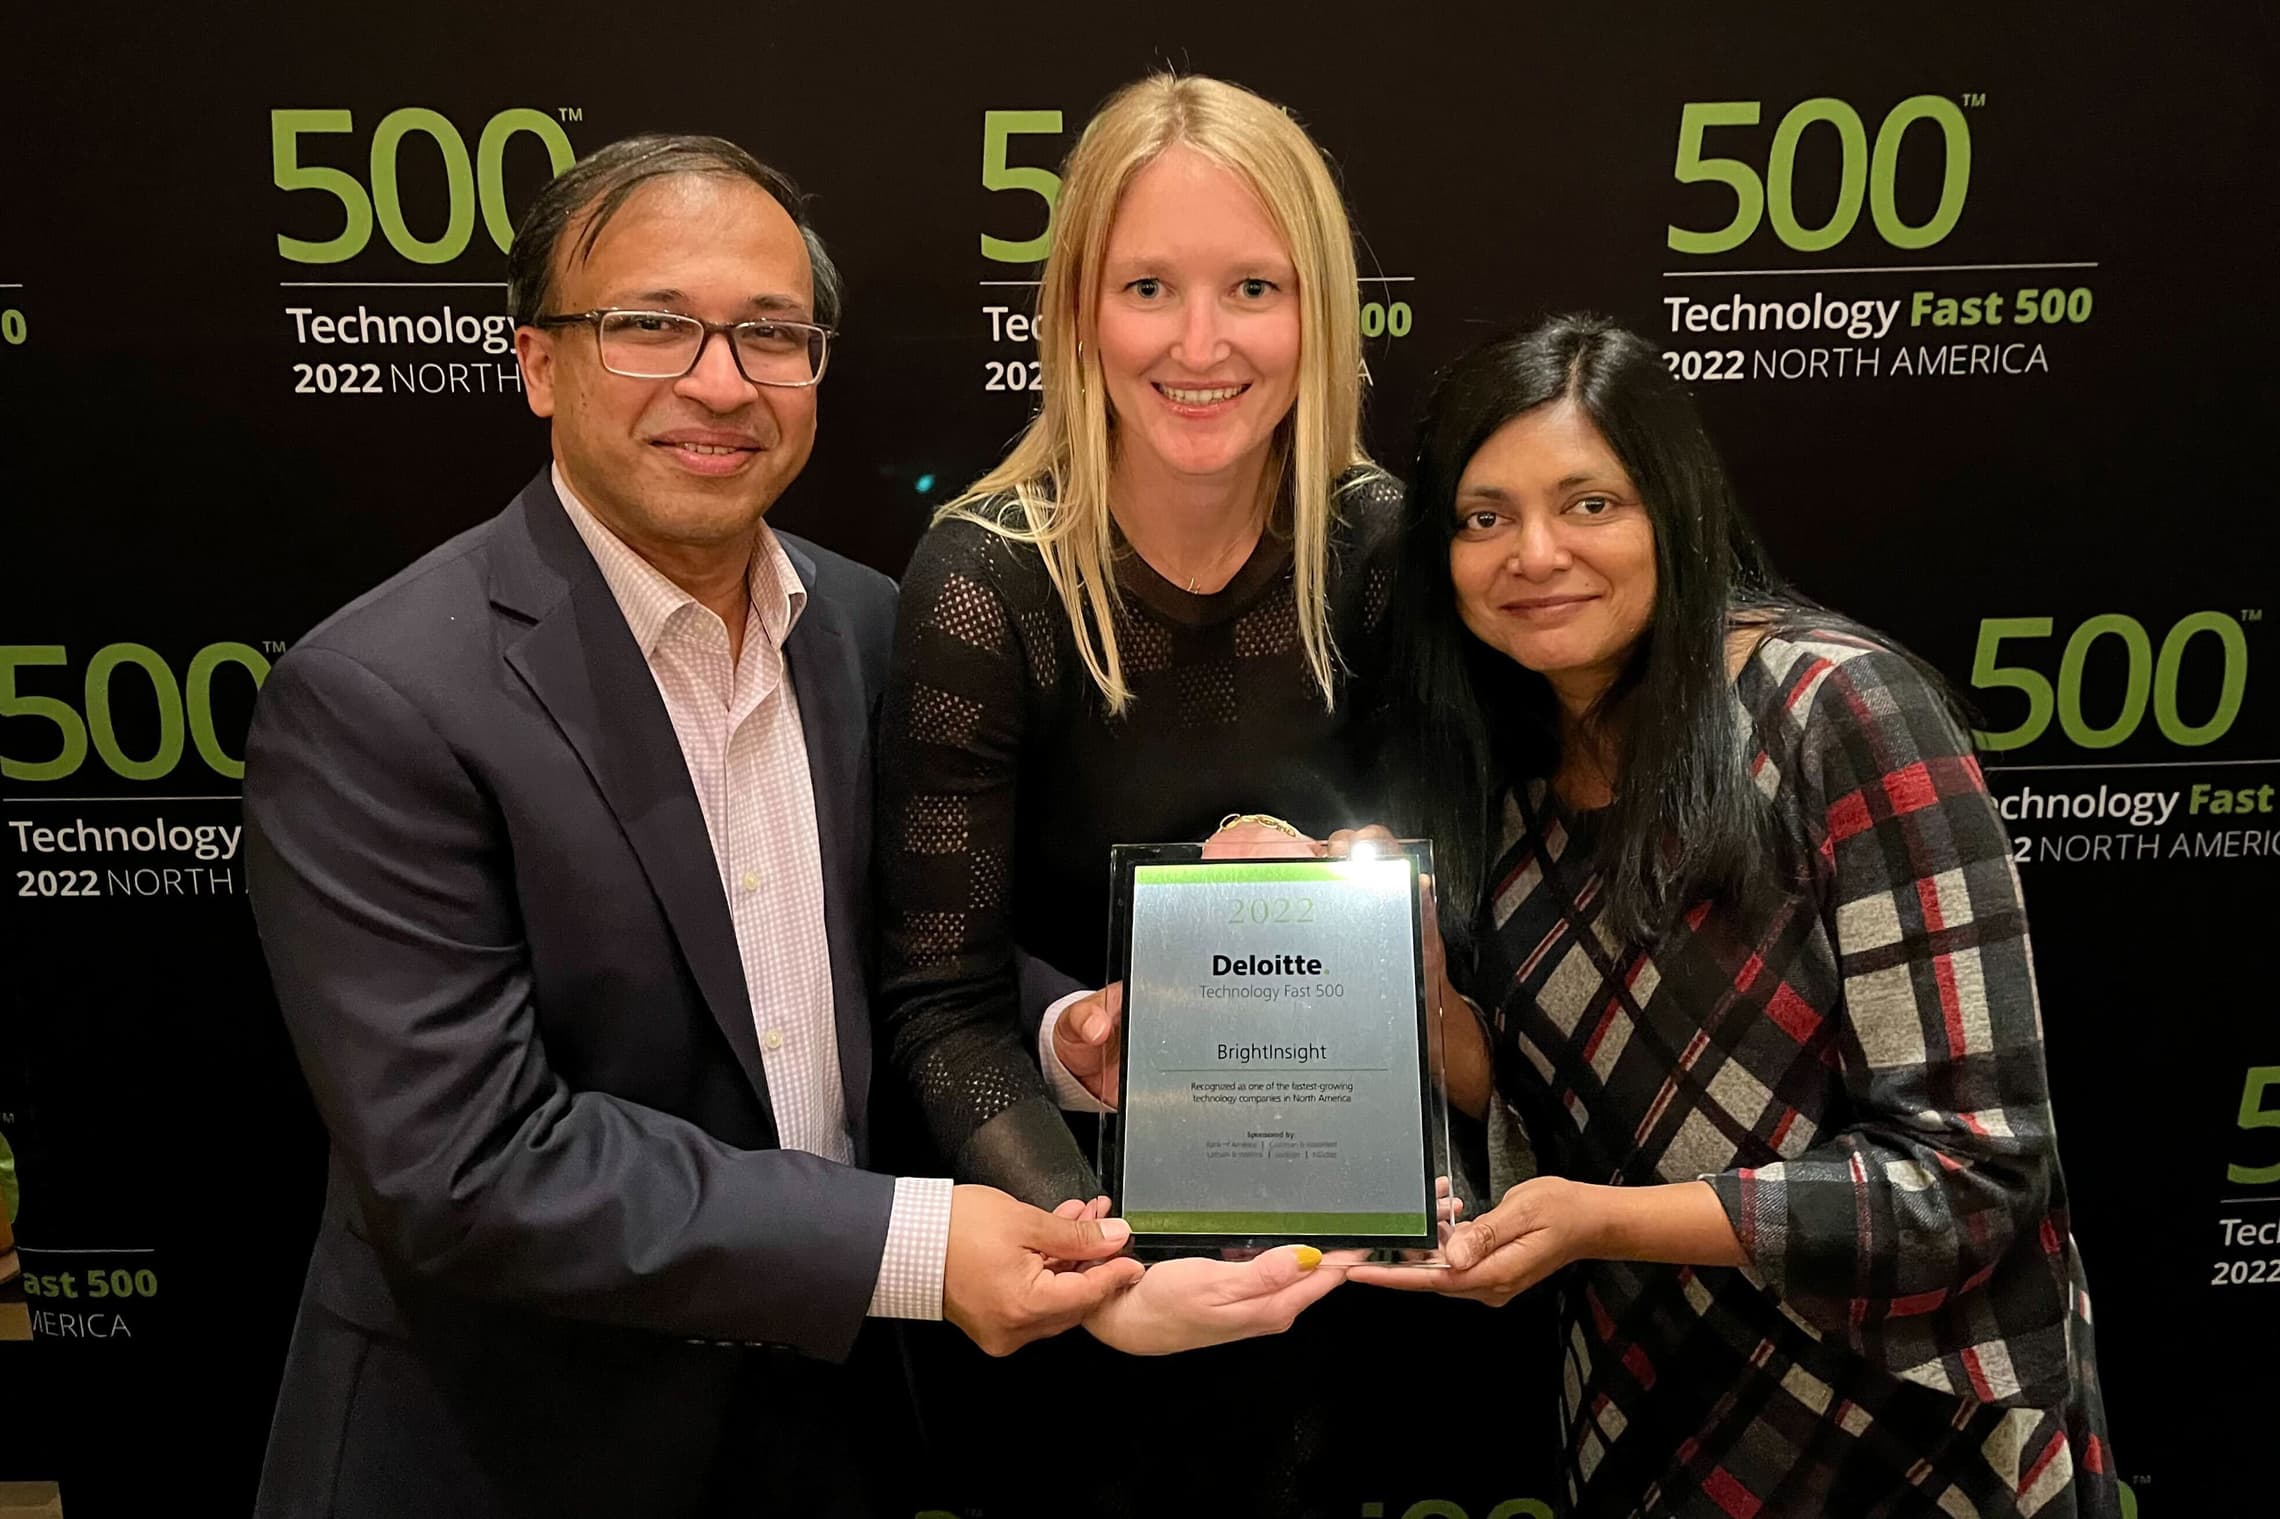 Brightinsight makes the 2022 deloitte technology fast 500 list of fastest growing companies